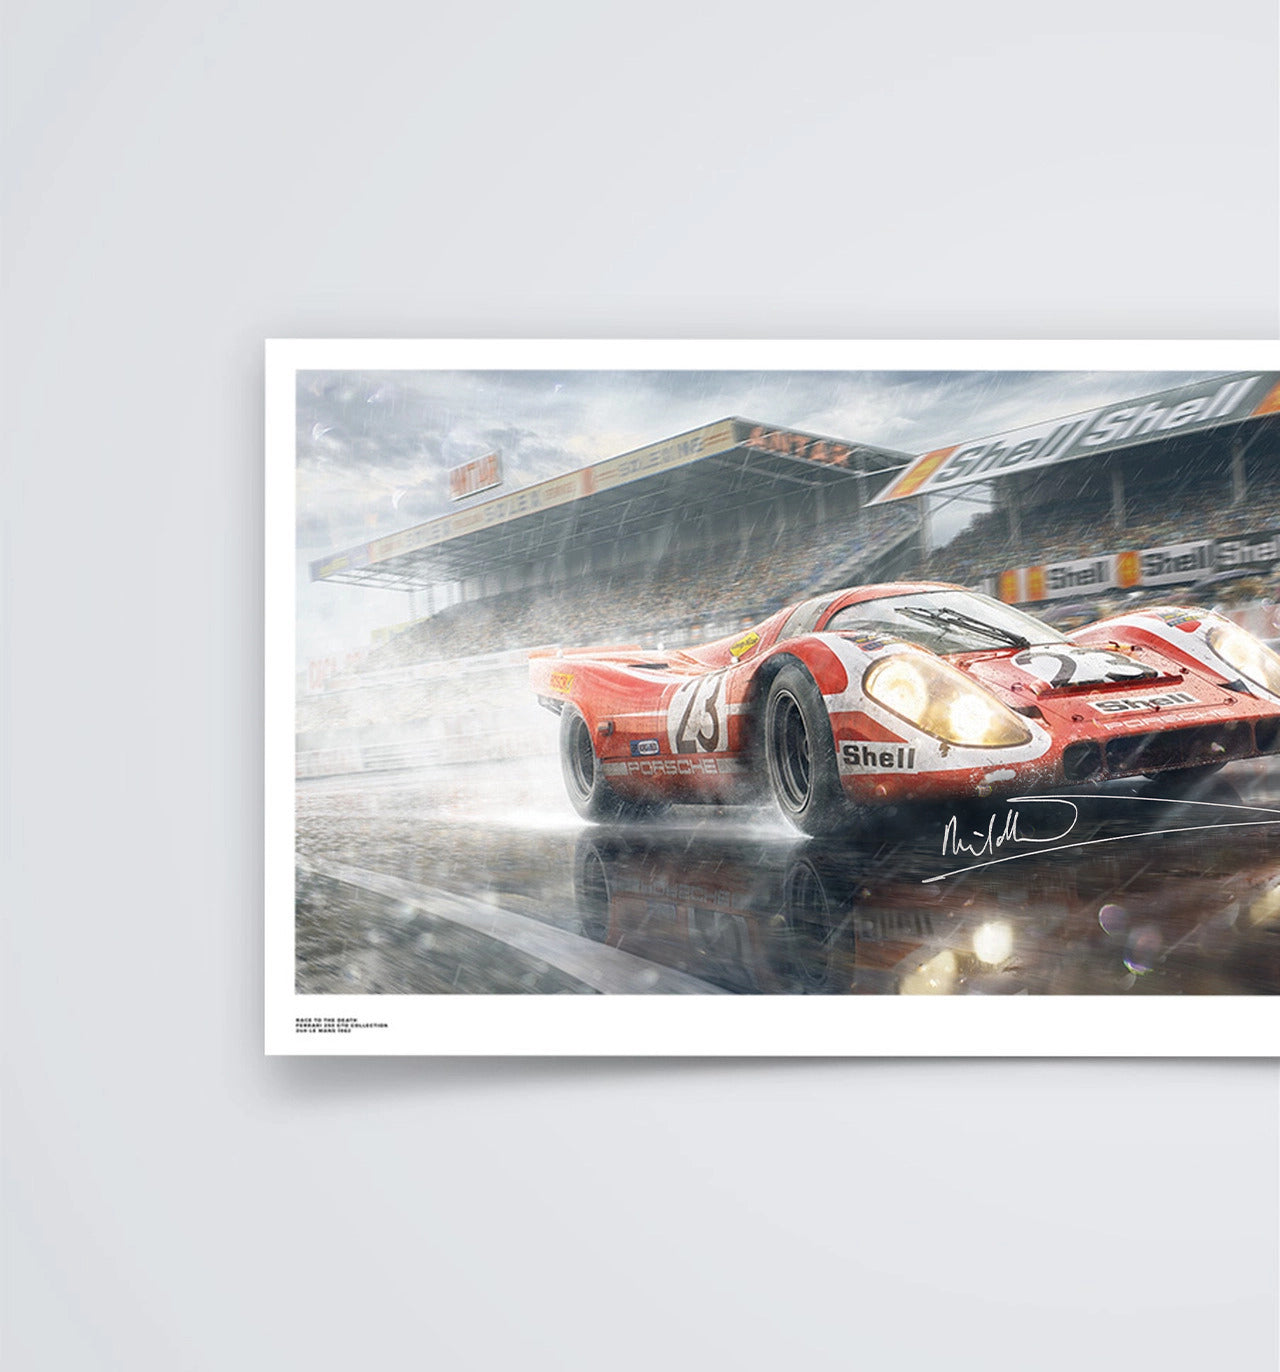 Signed by Richard Attwood - German Engineering, Hollywood Ending - Porsche 917K - 24 Hours of Le Mans - 1970 | Small Fine Art Print - Automobilist